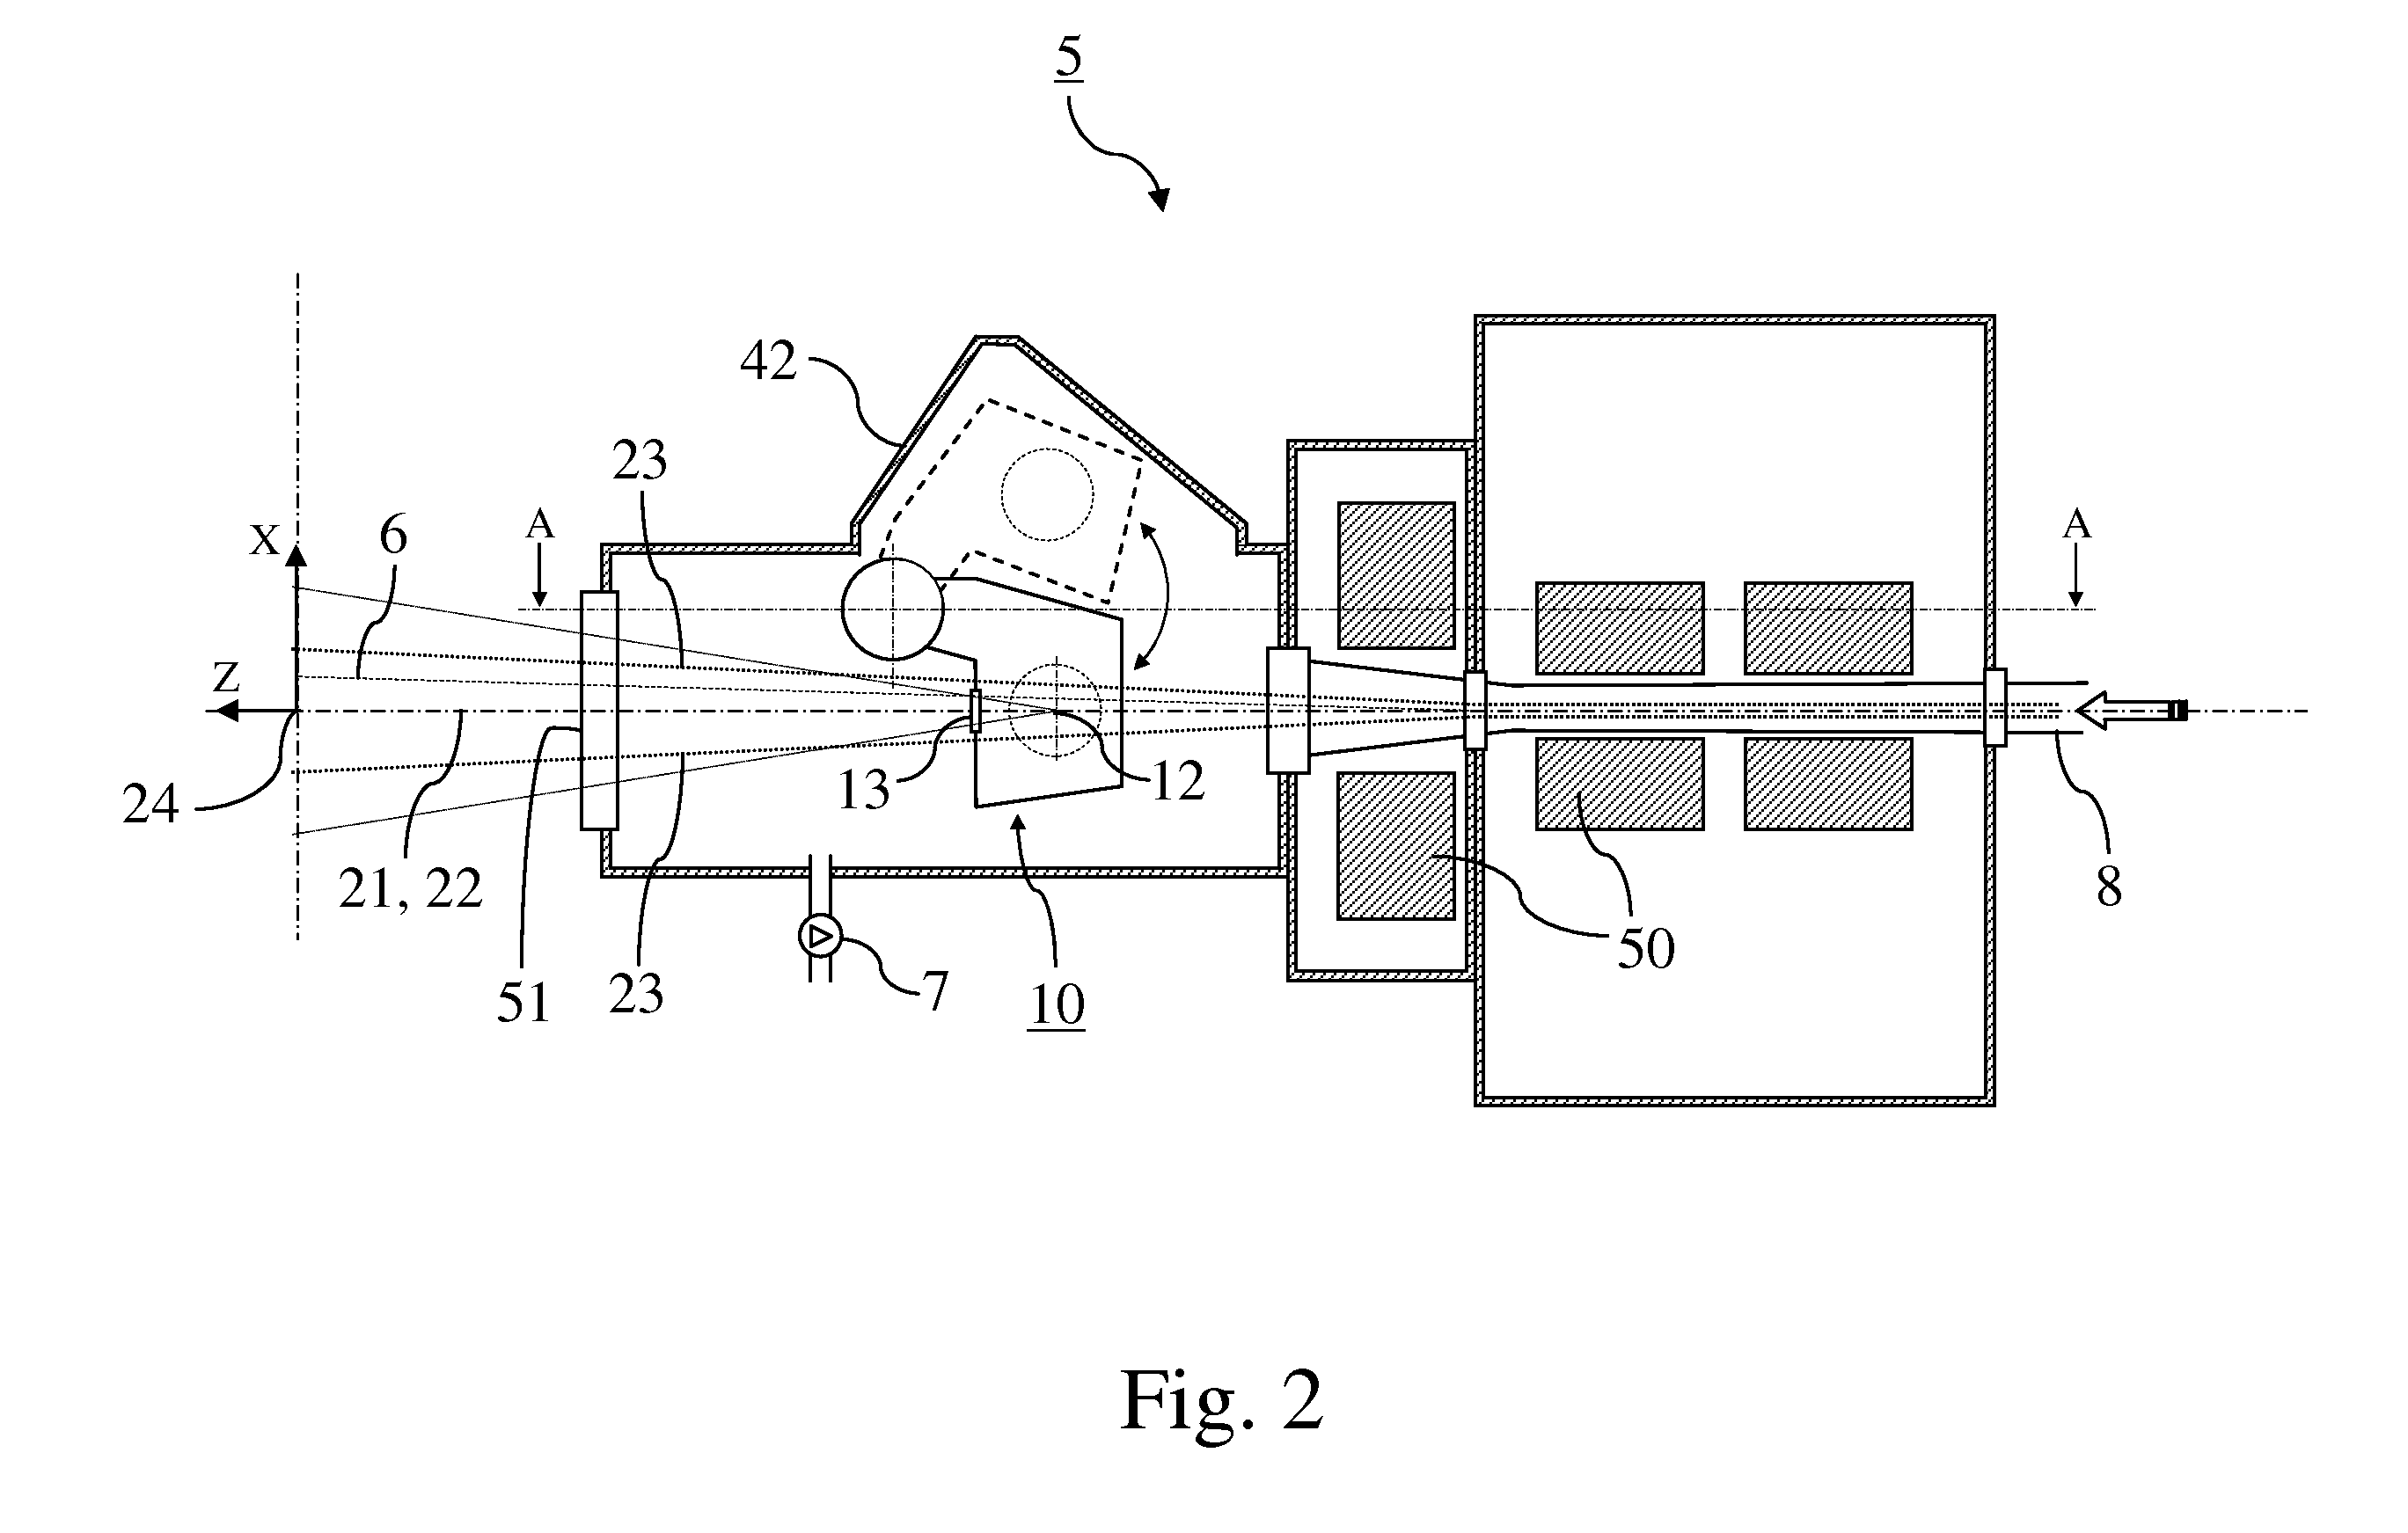 Charged particle beam therapy system having an x-ray imaging device